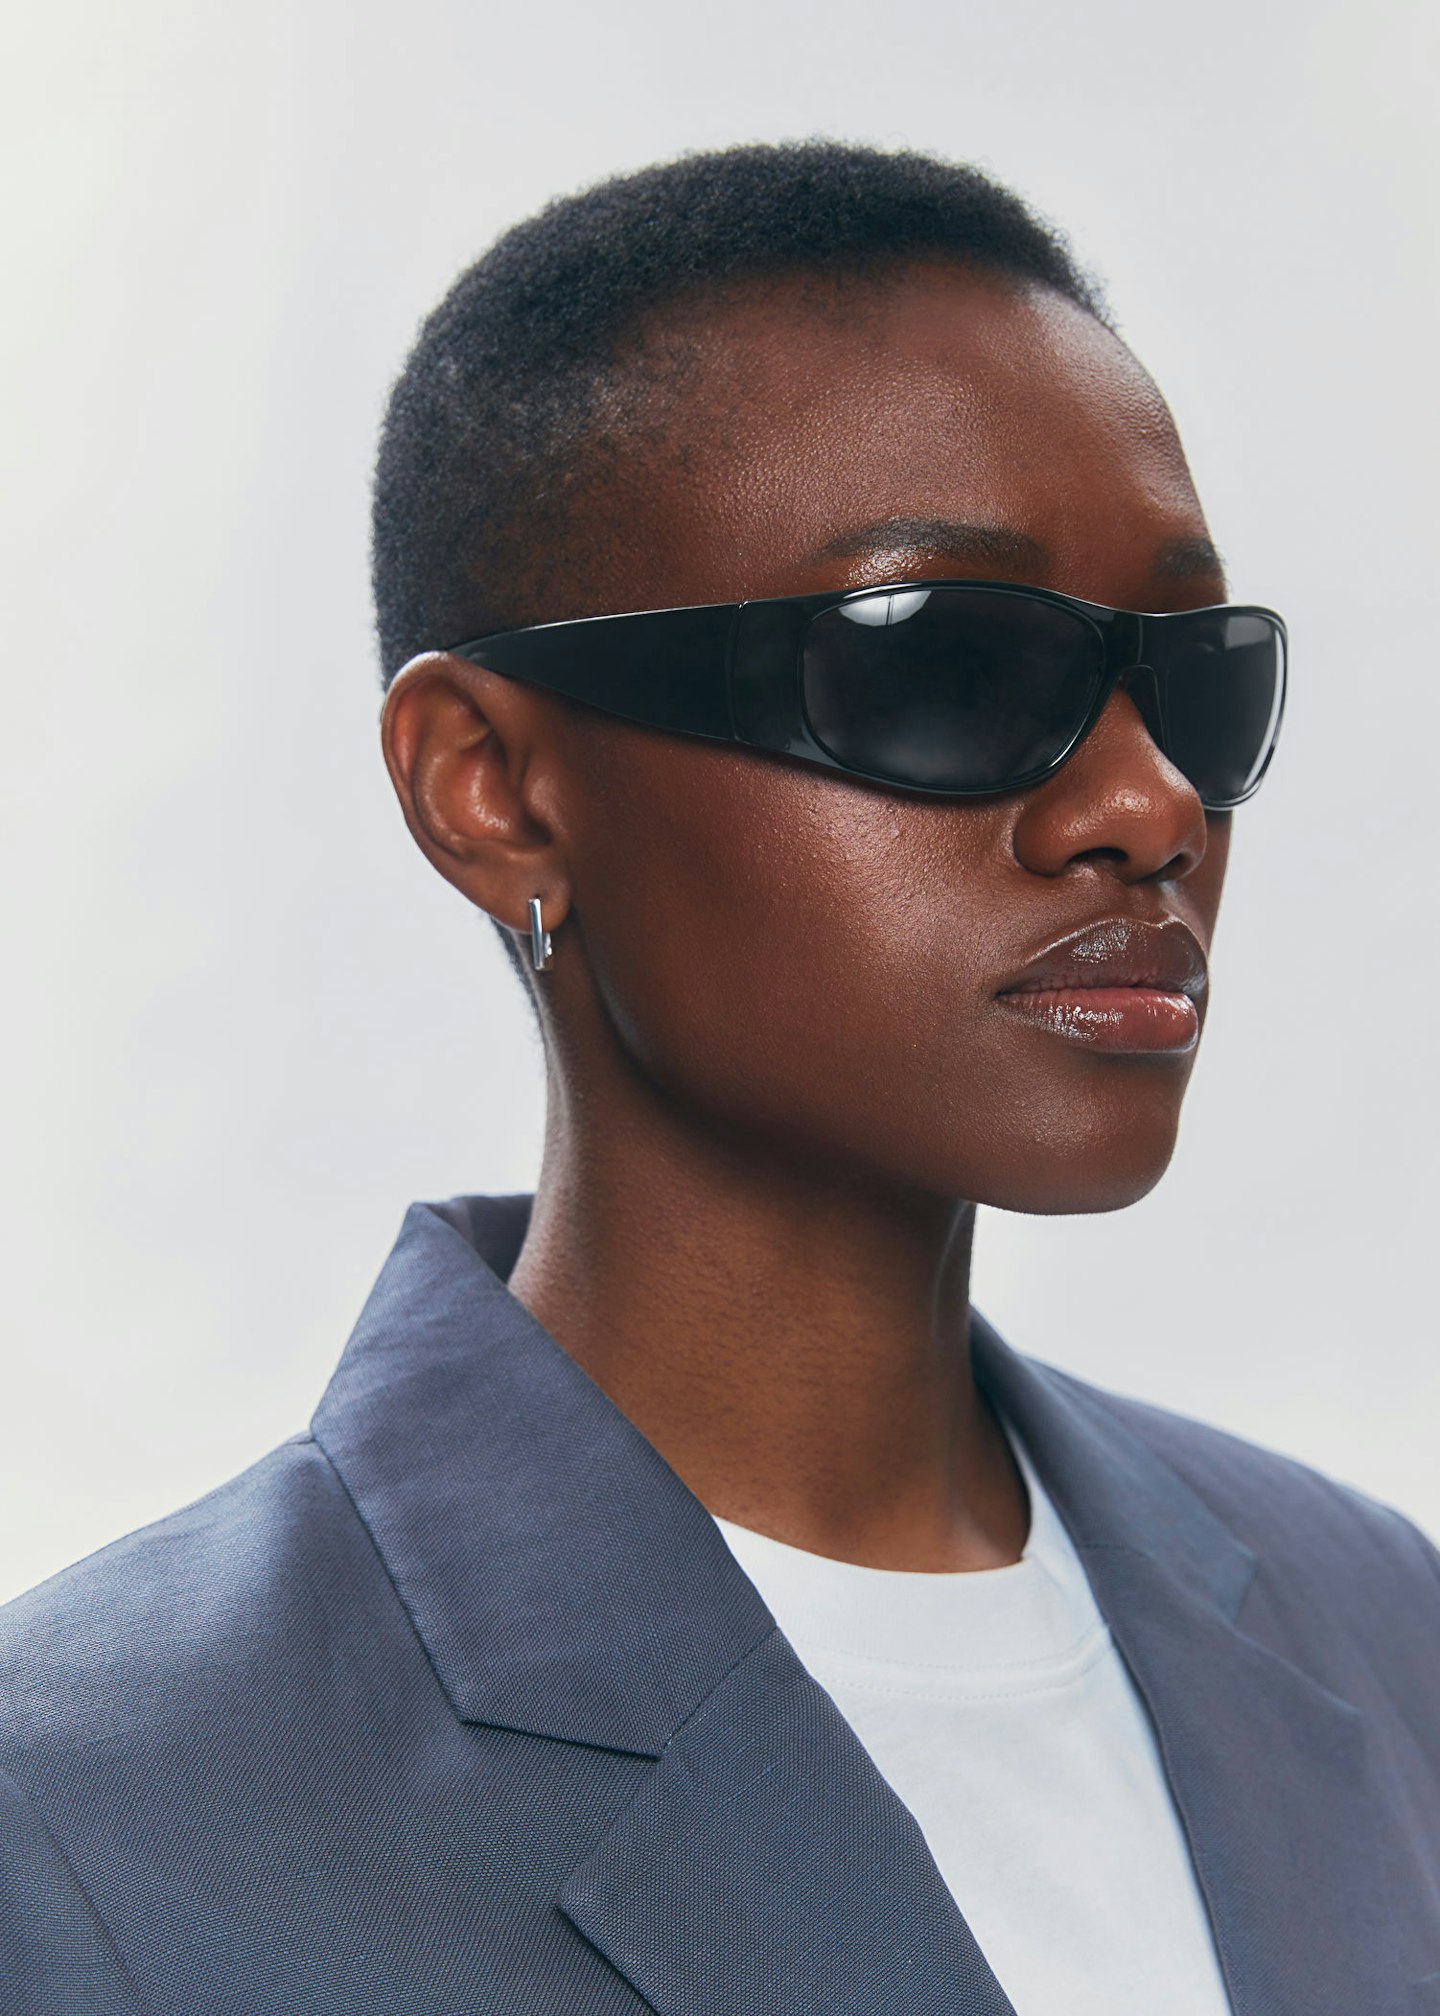 & Other Stories, Curvilinear Silhouette Sunglasses